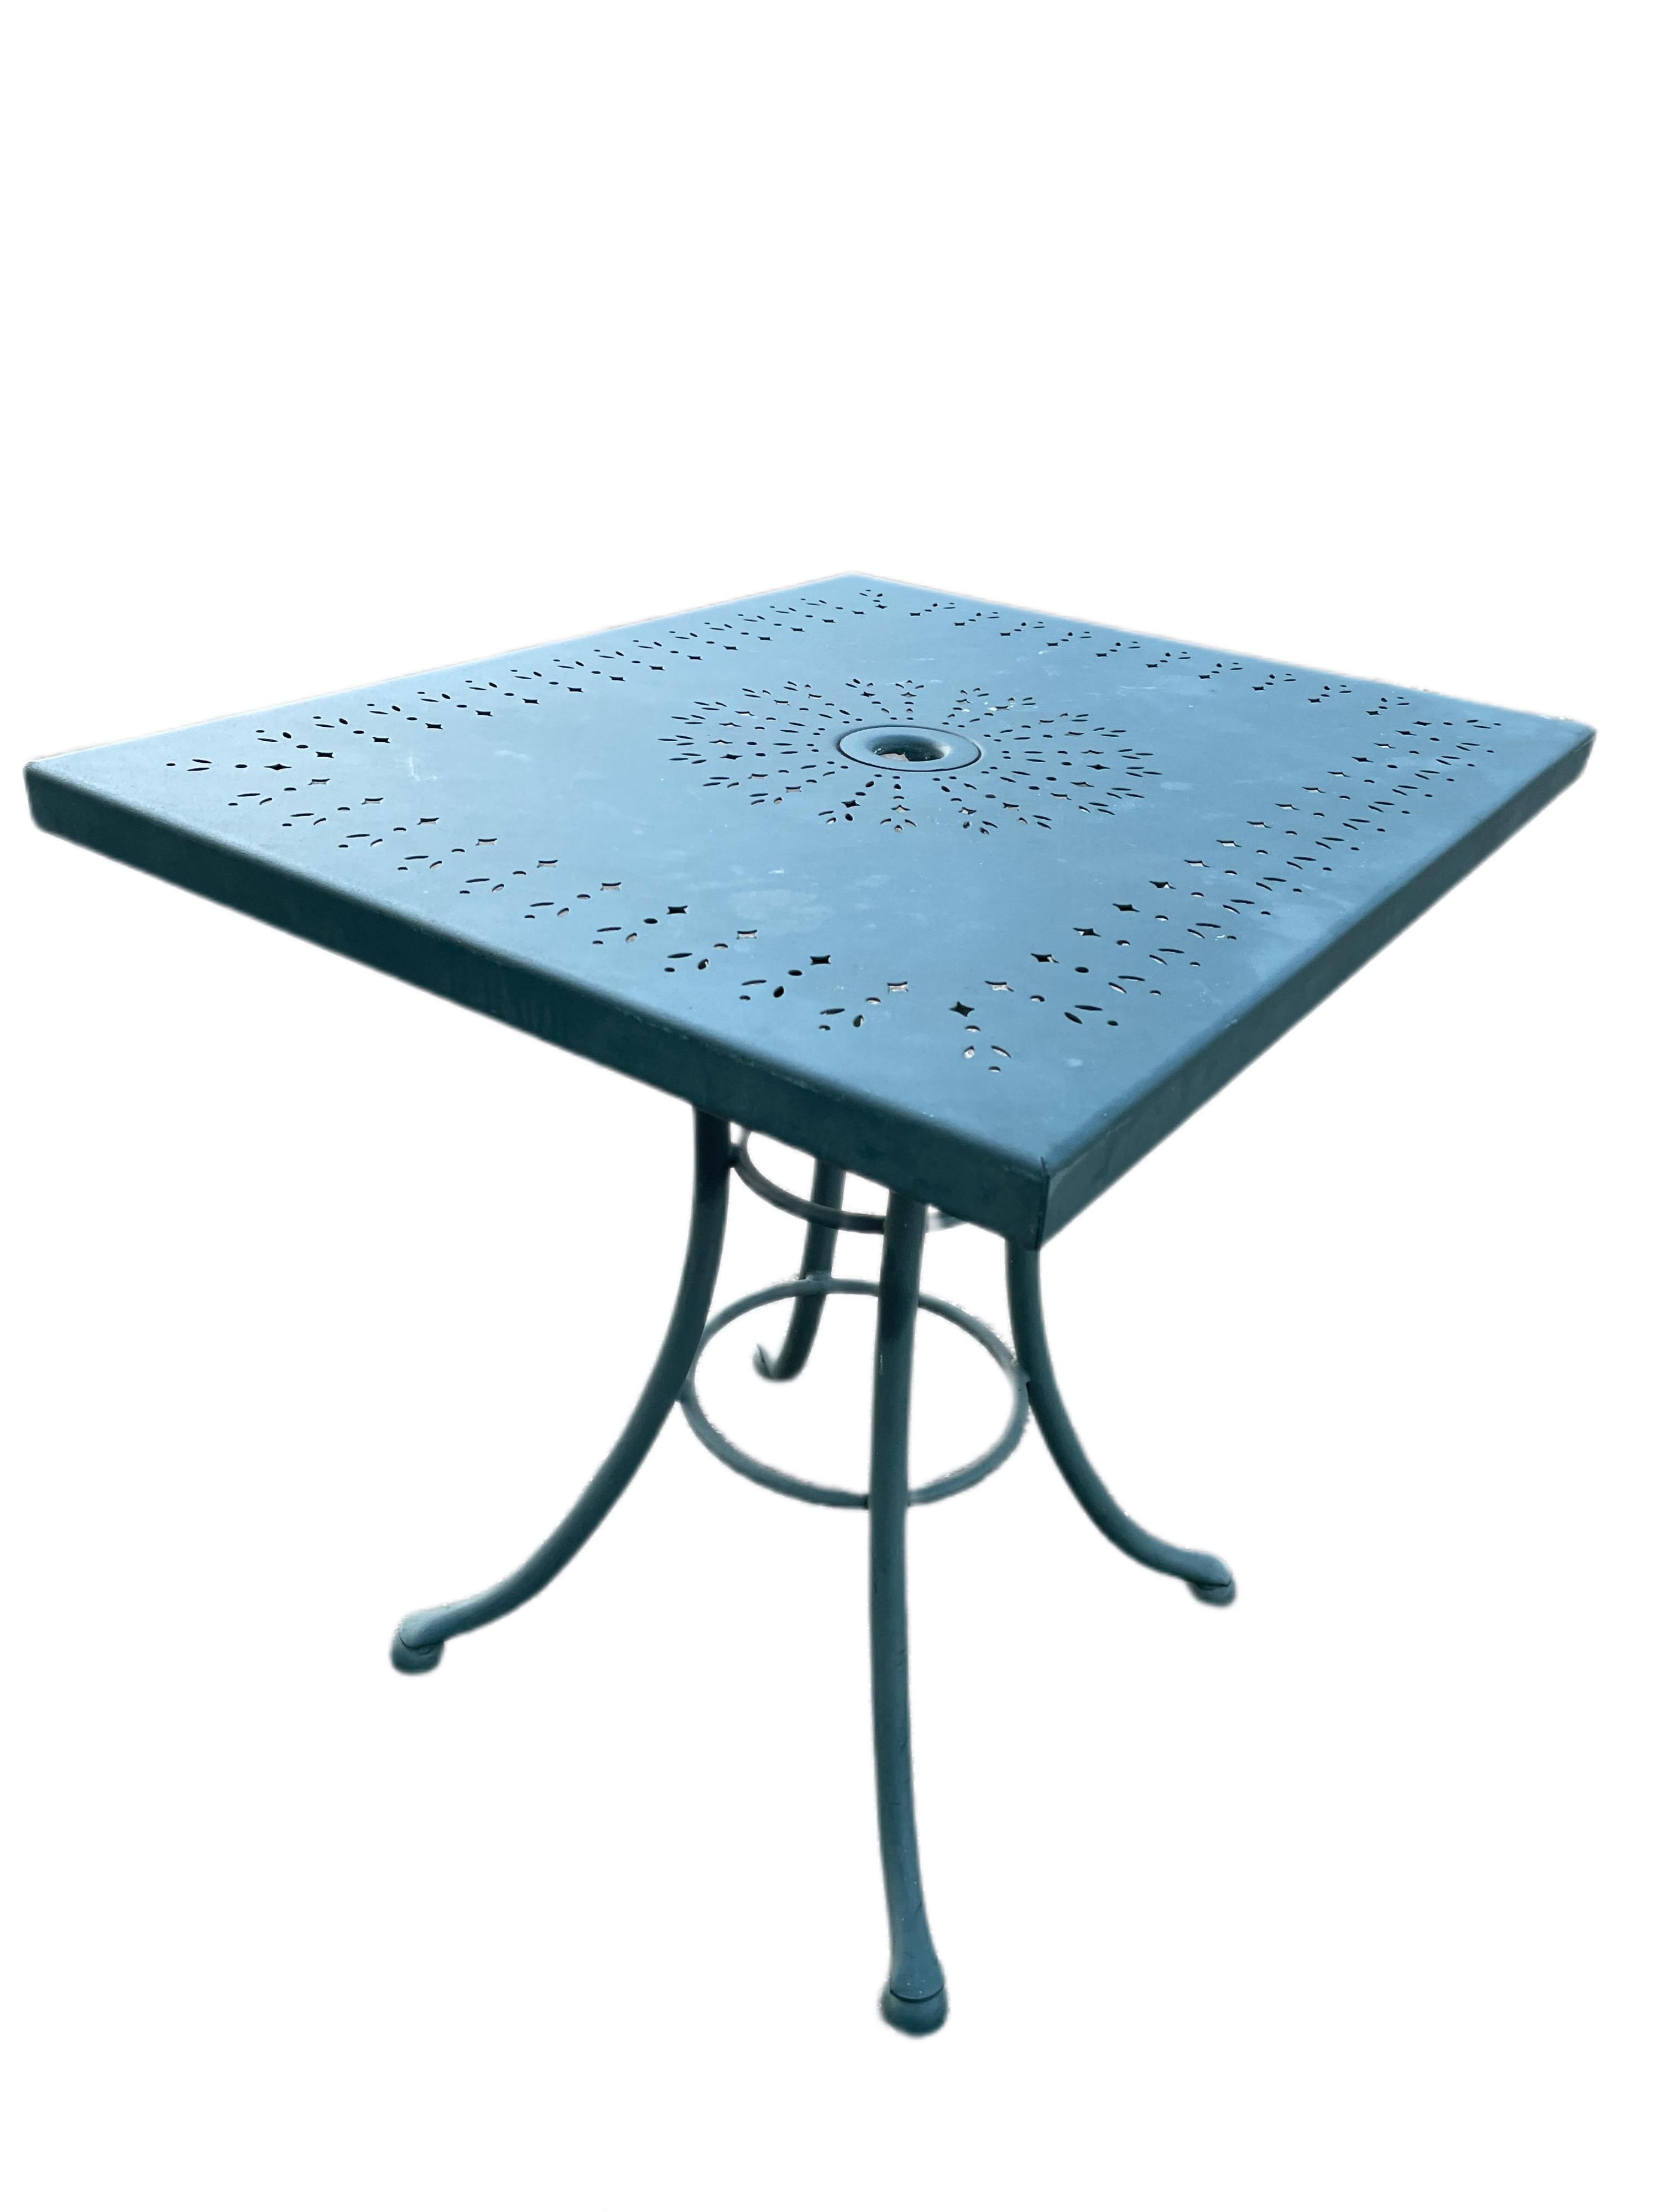 20th Century Homecrest Filagree Bistro Table For Sale